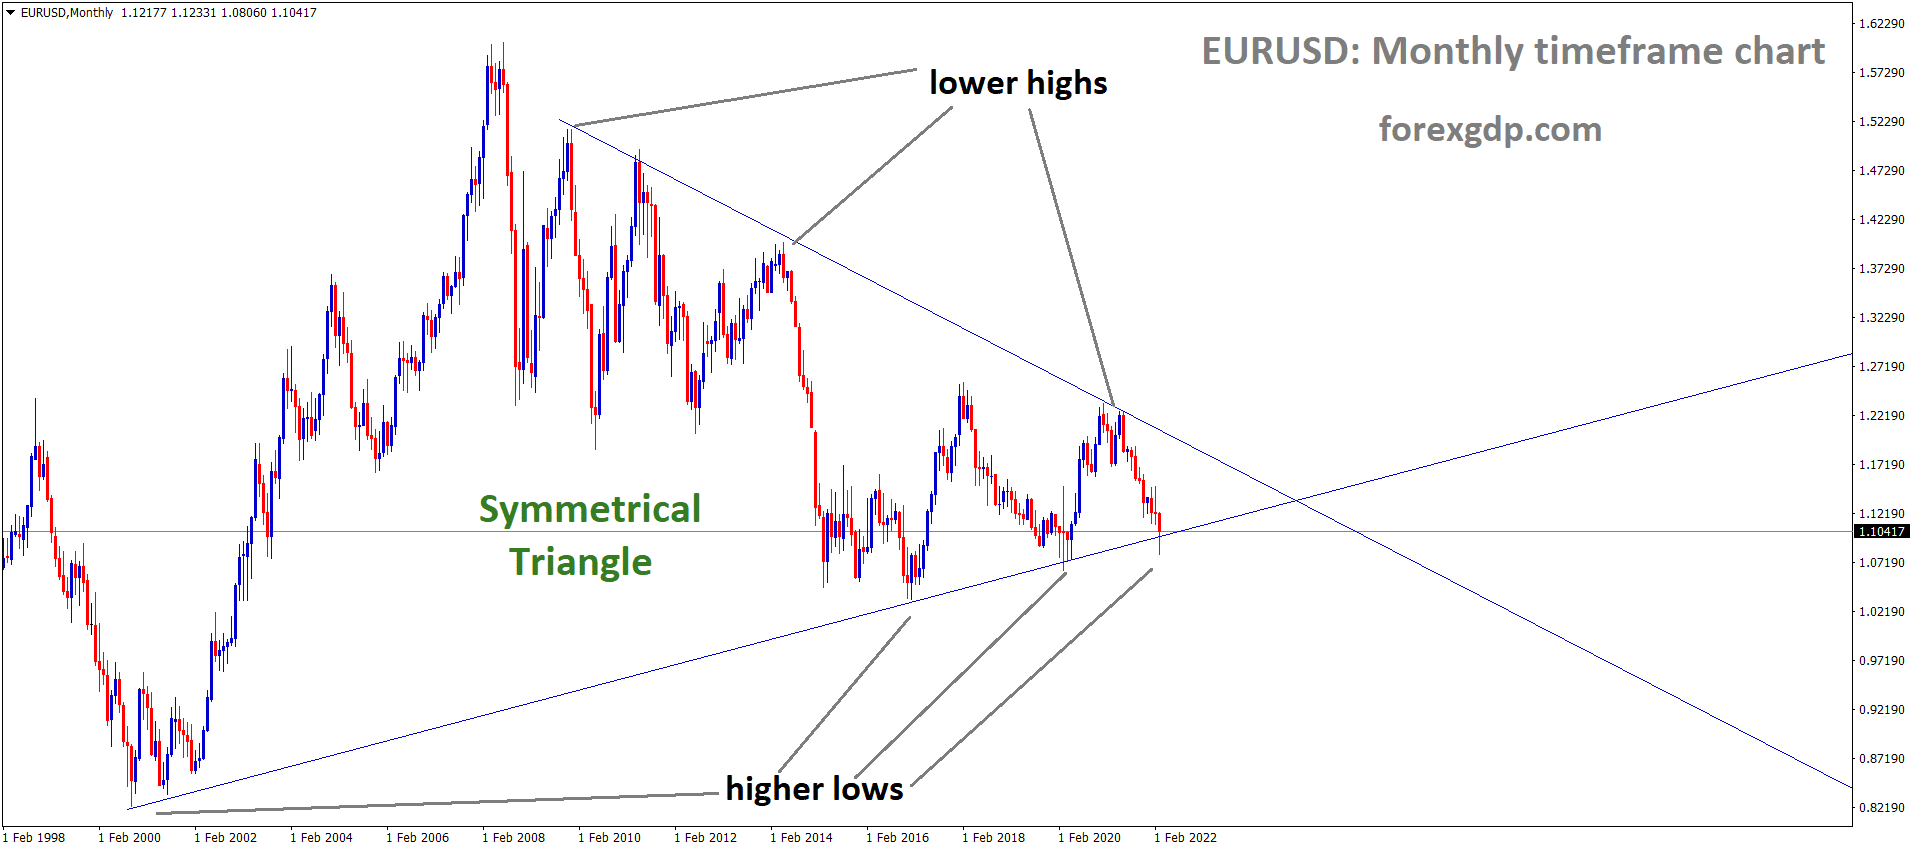 EURUSD Monthly Time Frame Market has reached the Bottom area of the Symmetrical triangle pattern.